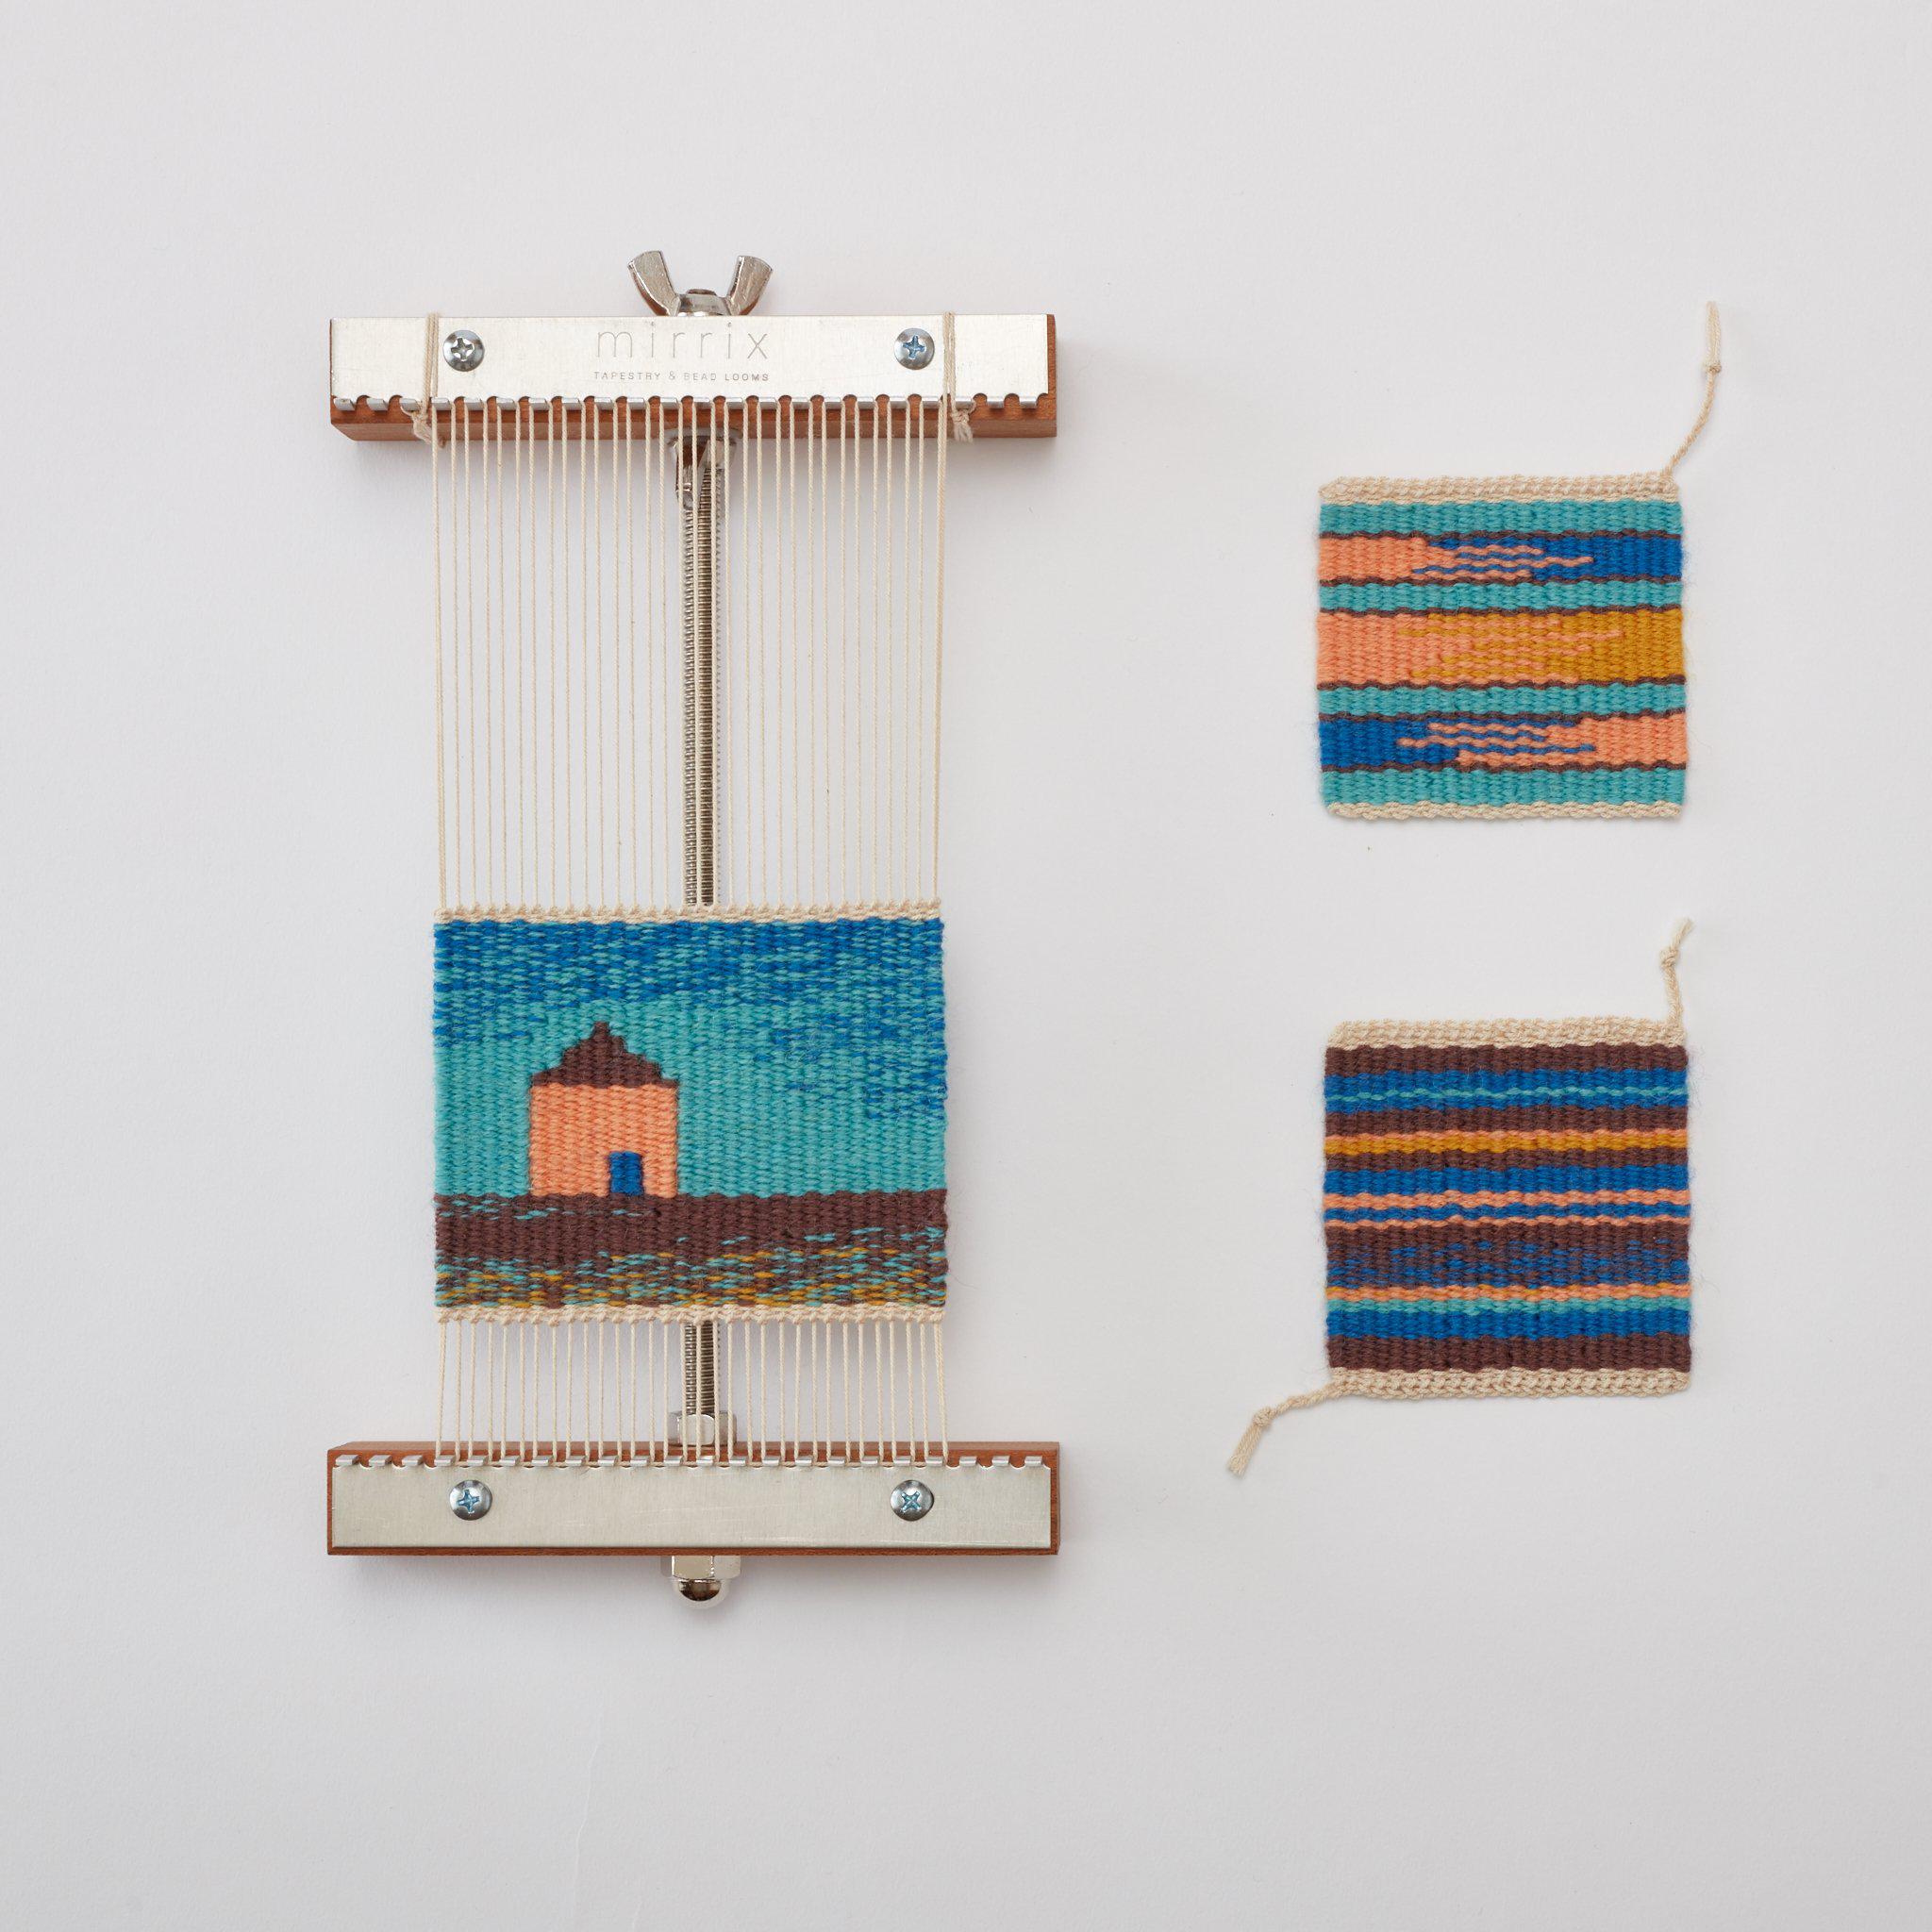 Learn to Weave Tapestry with Rebecca Mezoff: A Loom, a Yarn Kit, and an  Online Course